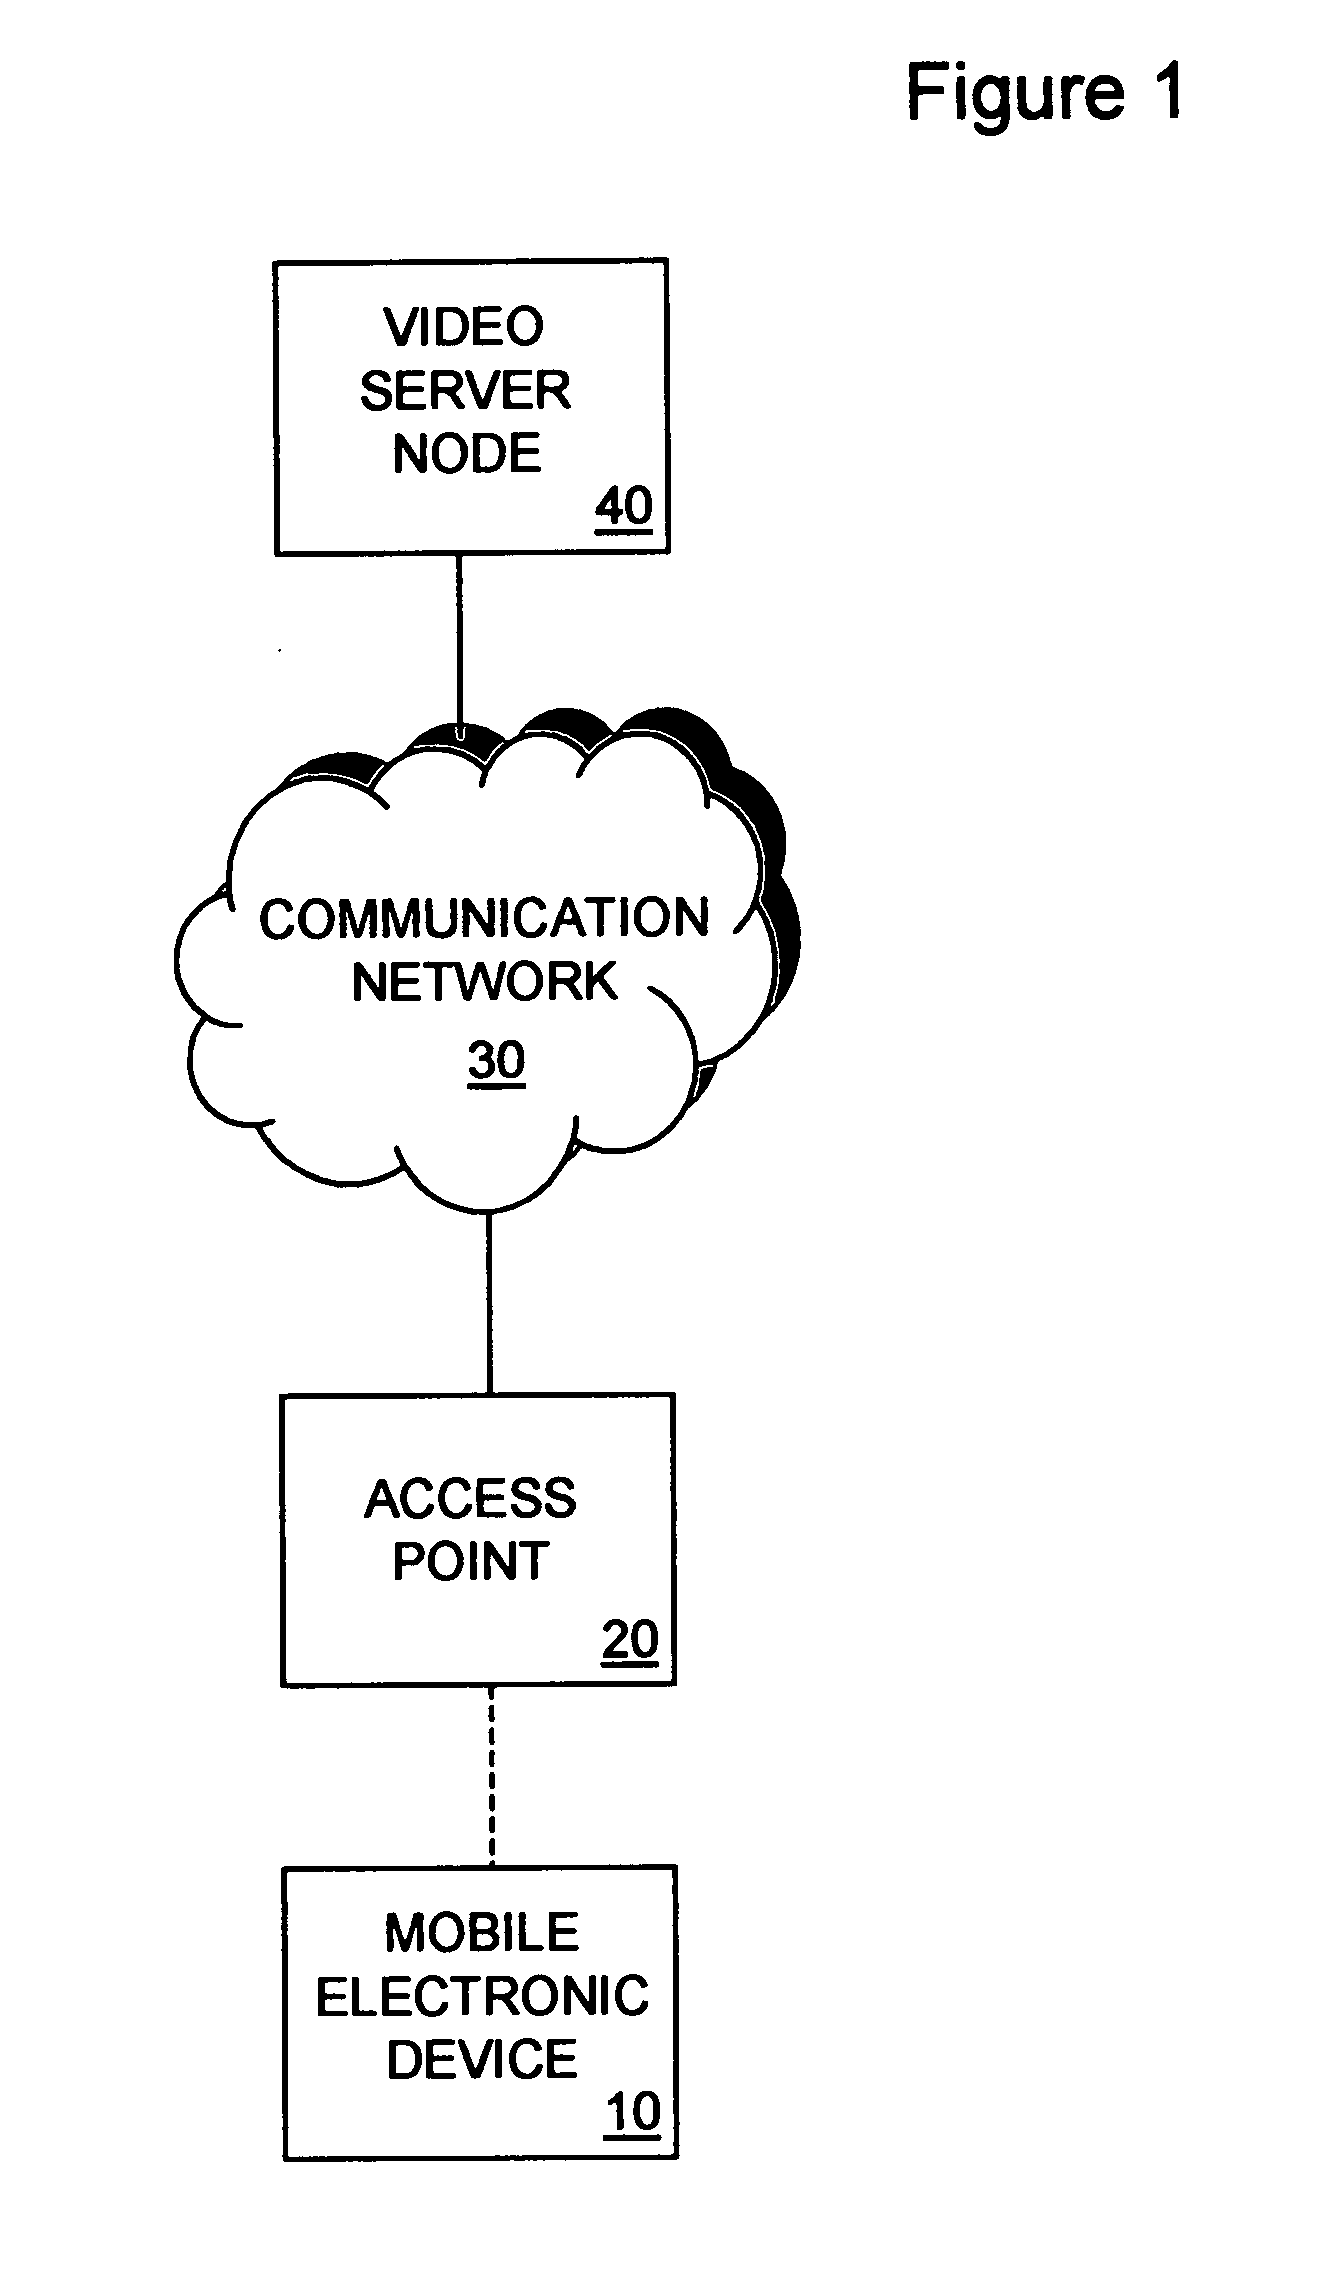 Method and system for optimizing mobile electronic device performance when processing video content